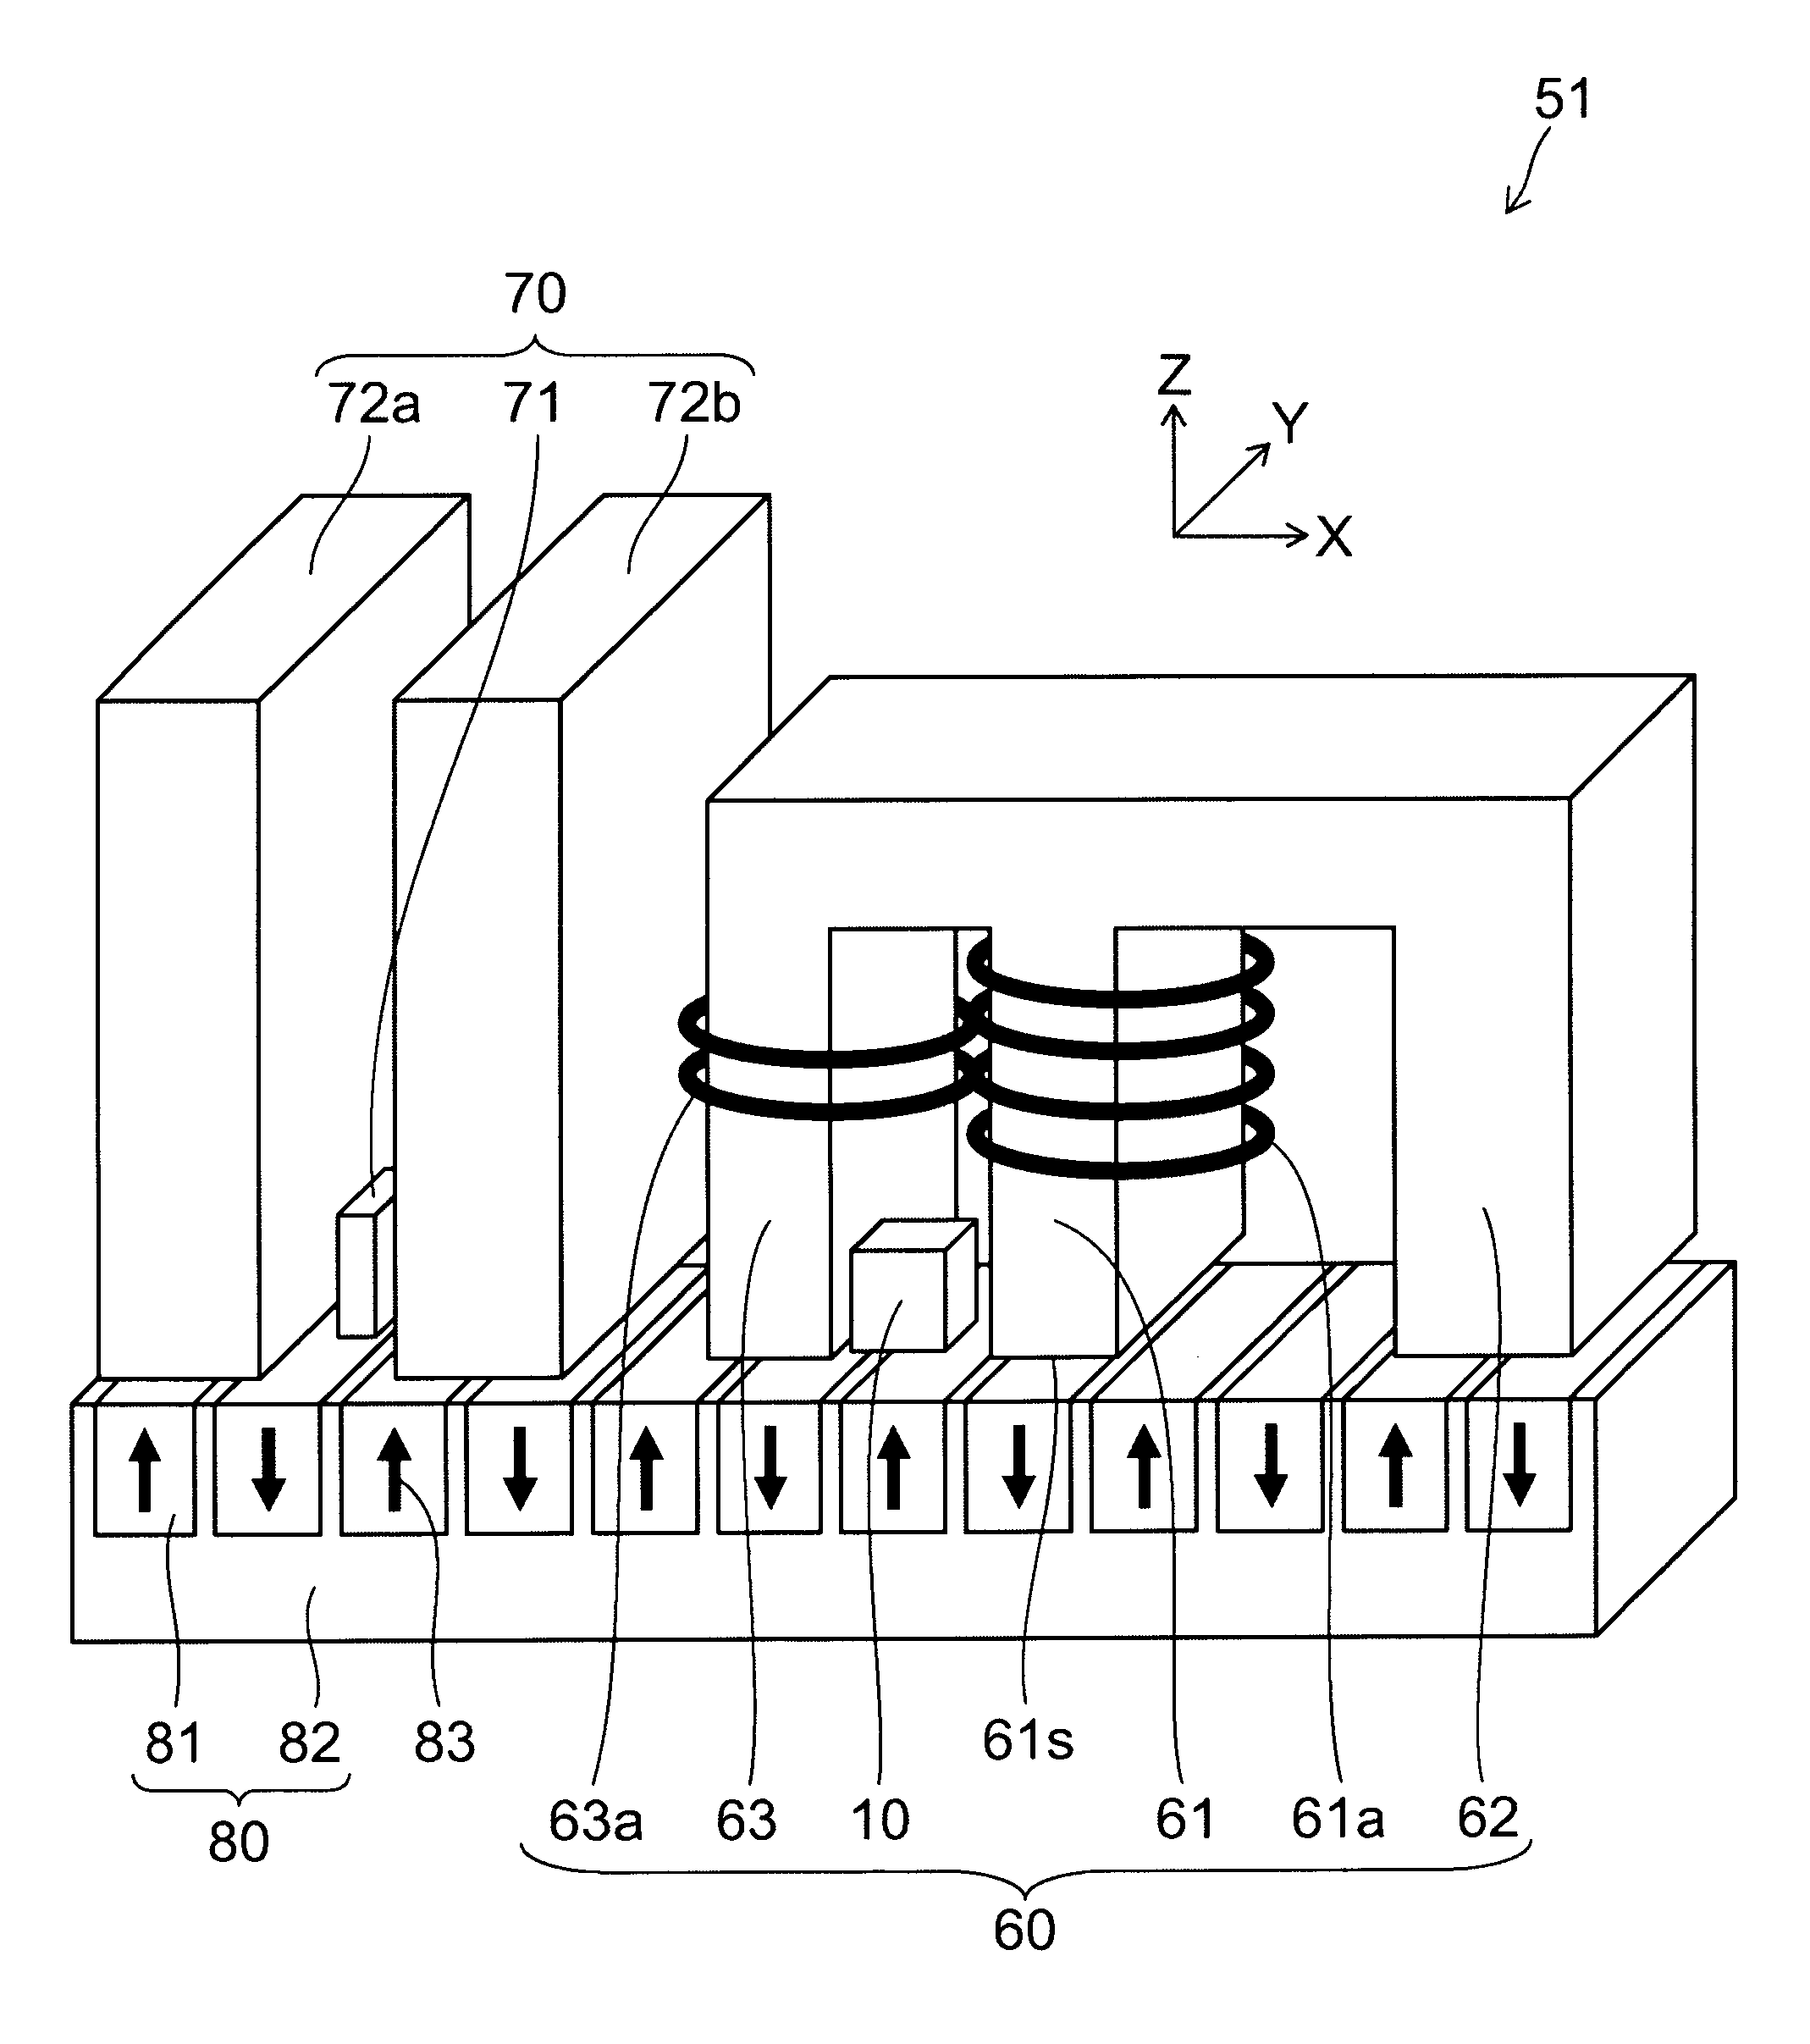 Magnetic head assembly and magnetic recording apparatus